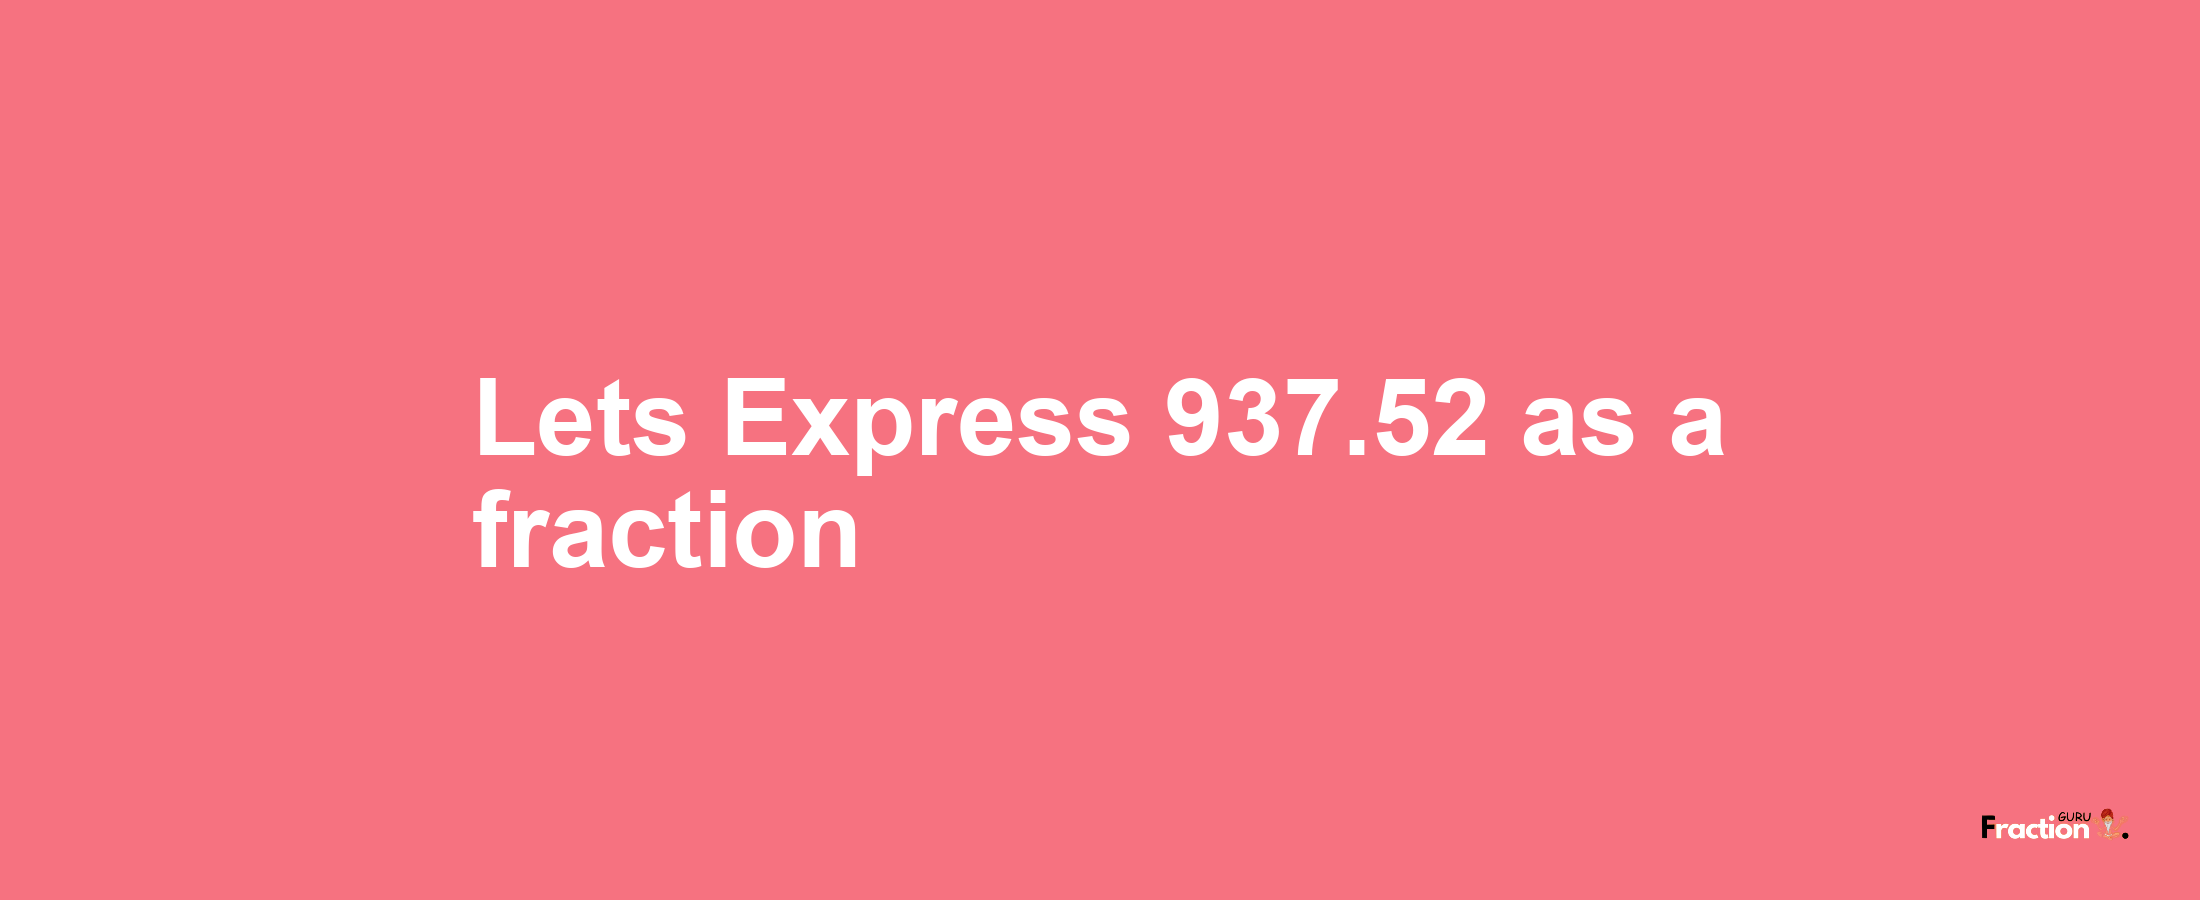 Lets Express 937.52 as afraction